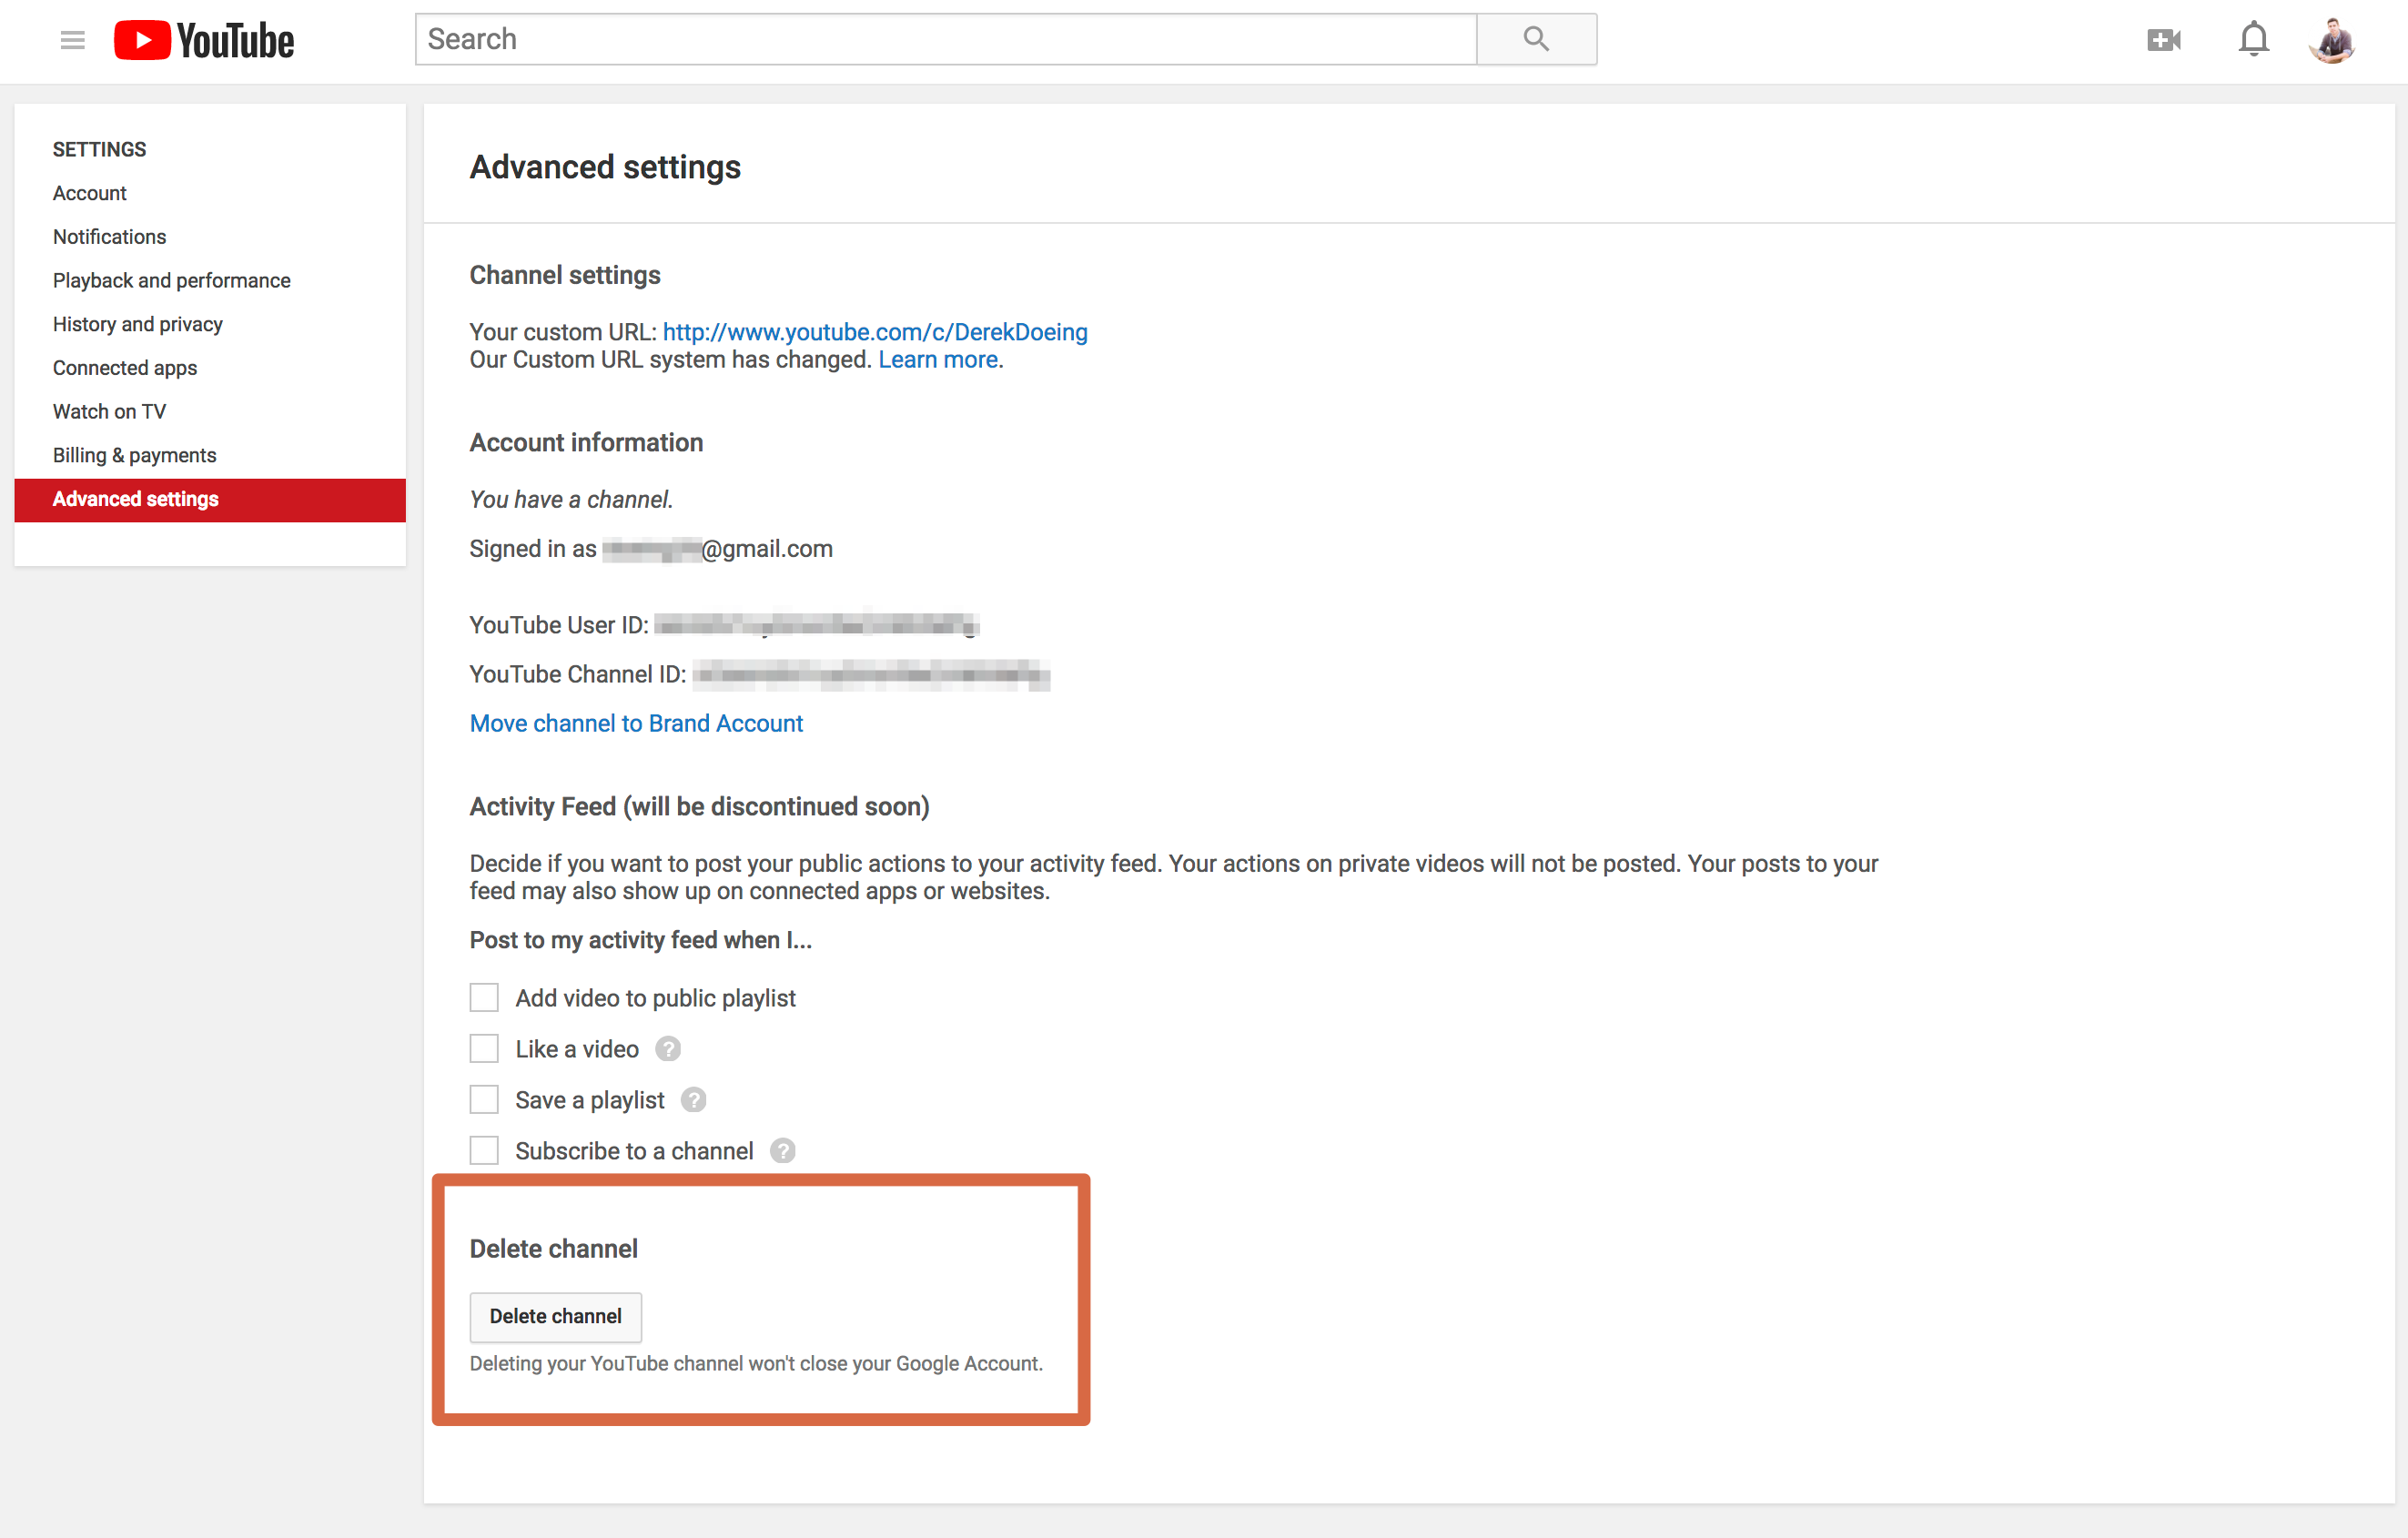 How to Delete a YouTube Account